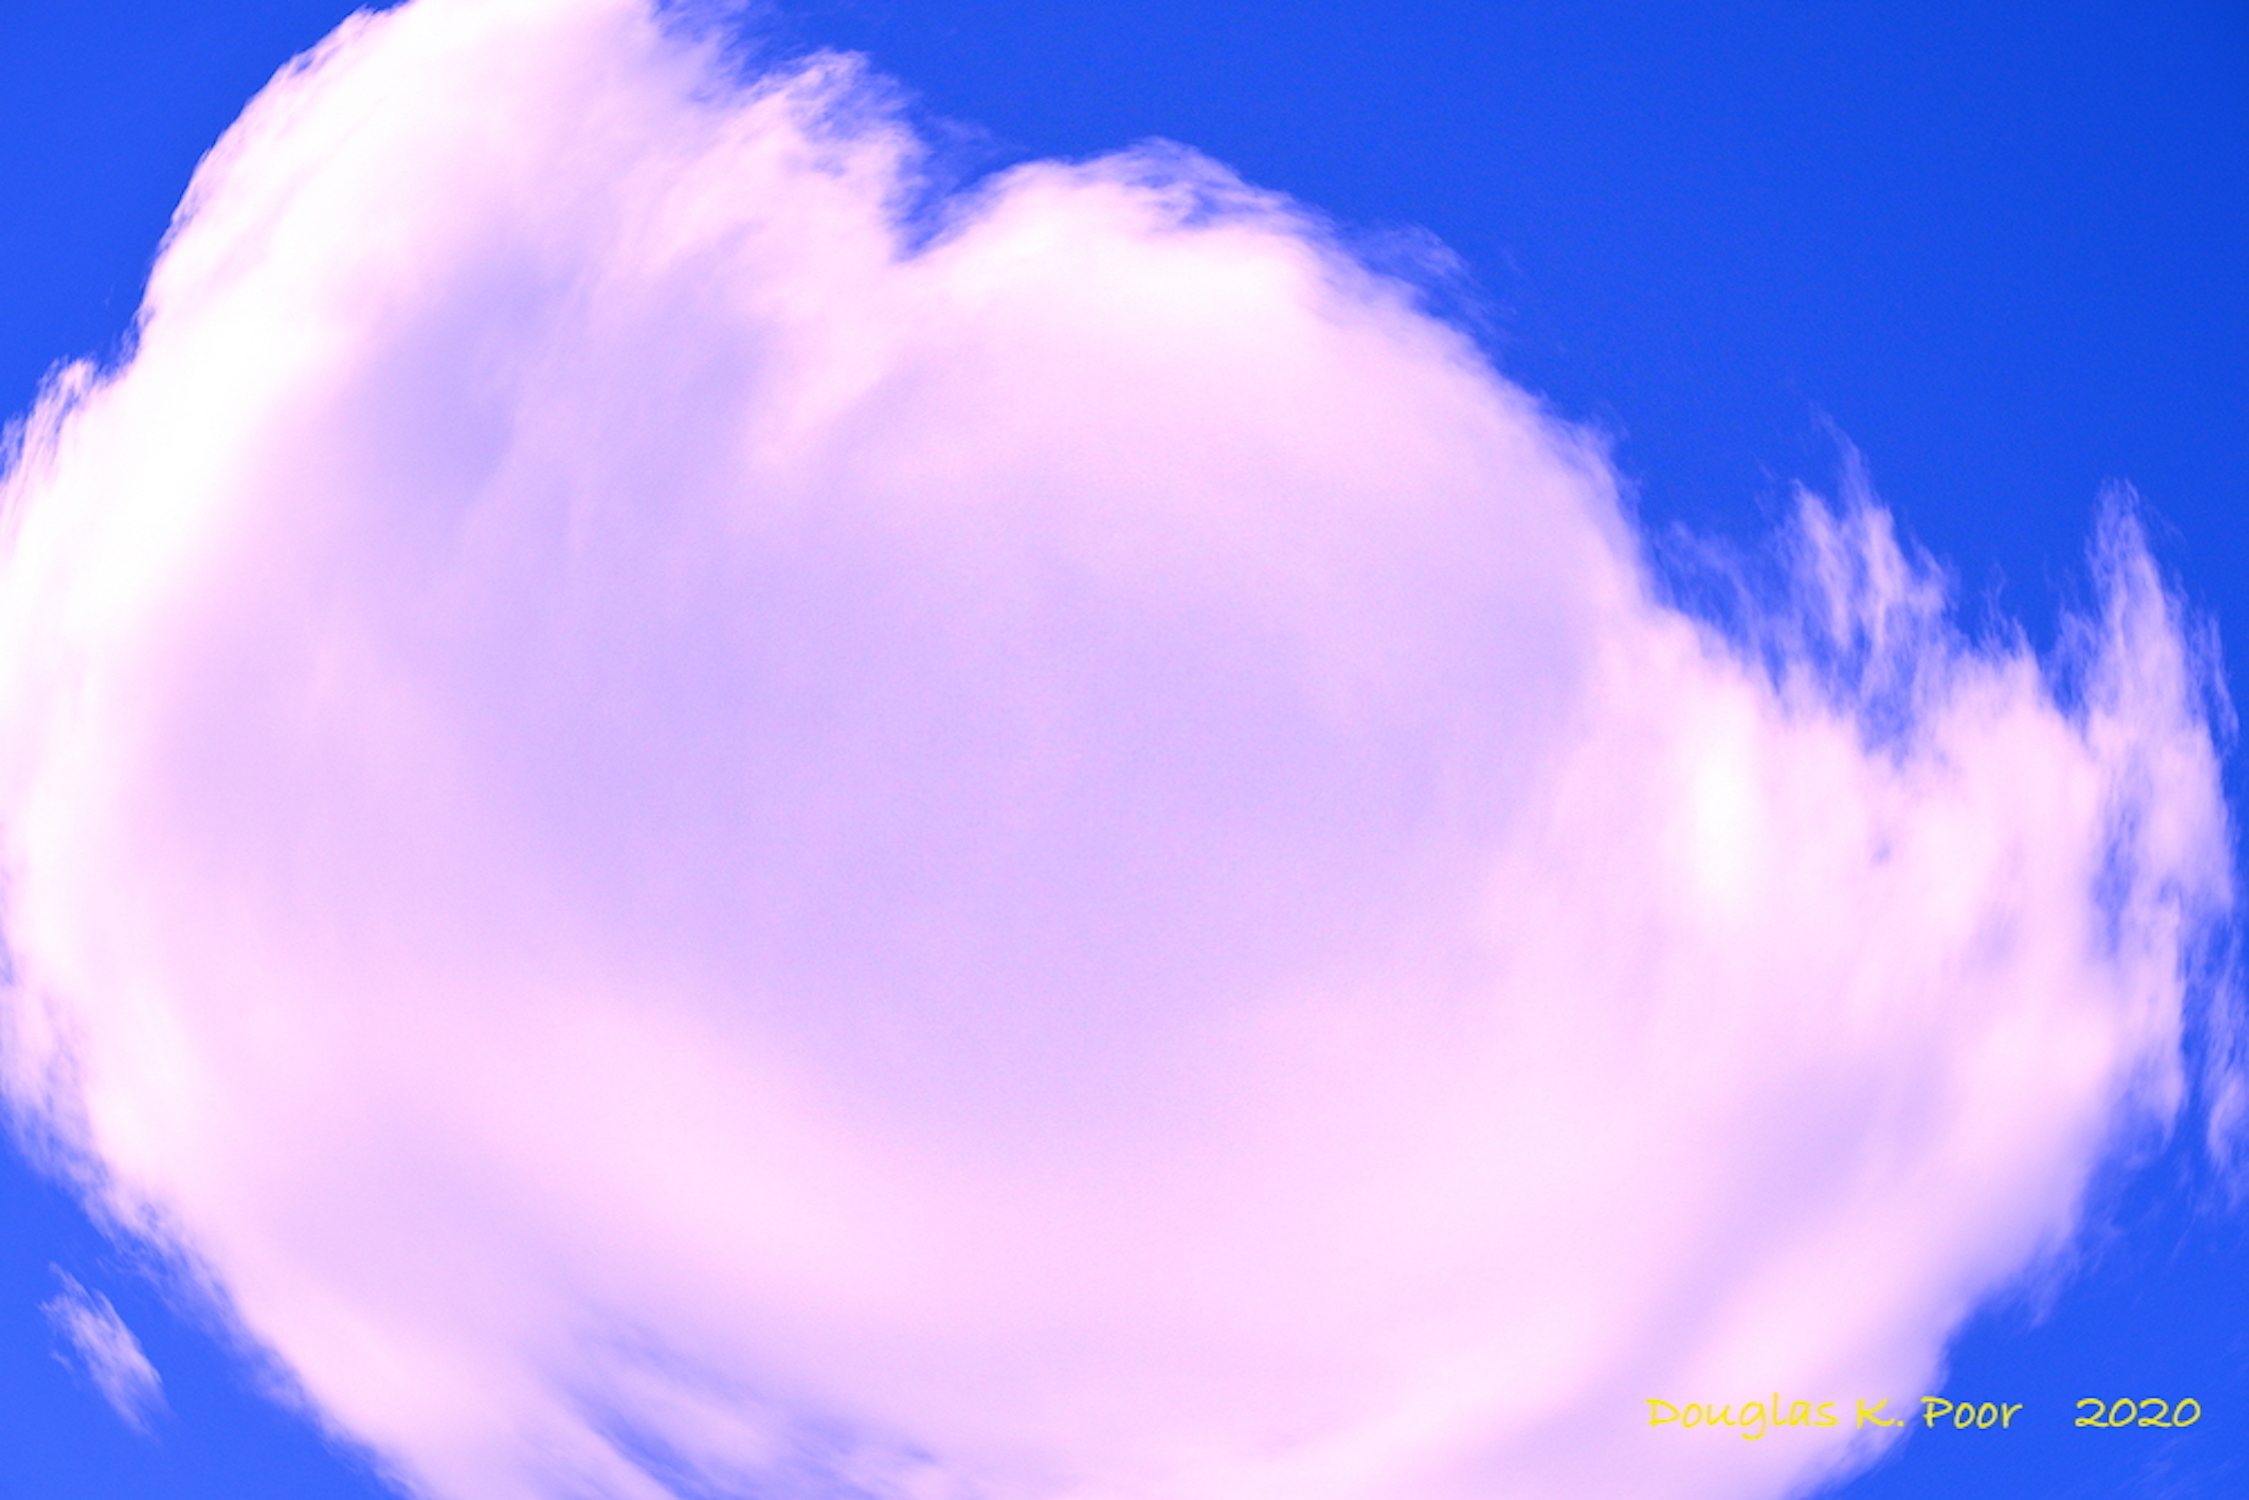 ROUND PINKISH CLOUD PICTURE BY DOUGLAS POOR